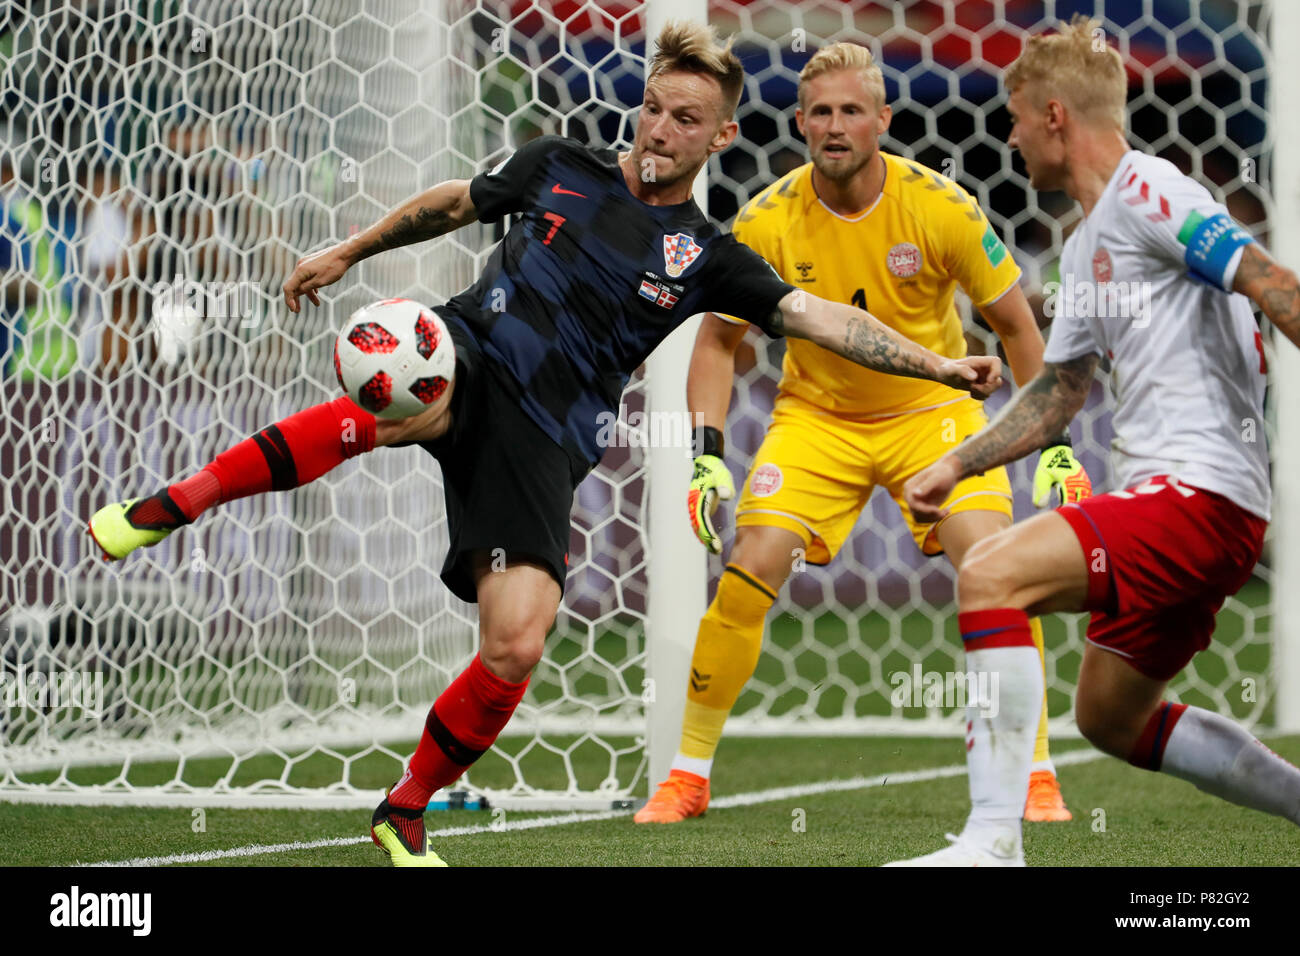 NIZHNY NOVGOROD, RUSSIA - JULY 1: Ivan Rakitic (L) of Croatia national team in action against Kasper Schmeichel and Simon Kjaer (R) of Denmark national team during the 2018 FIFA World Cup Russia Round of 16 match between Croatia and Denmark at Nizhny Novgorod Stadium on July 1, 2018 in Nizhny Novgorod, Russia. MB Media Stock Photo